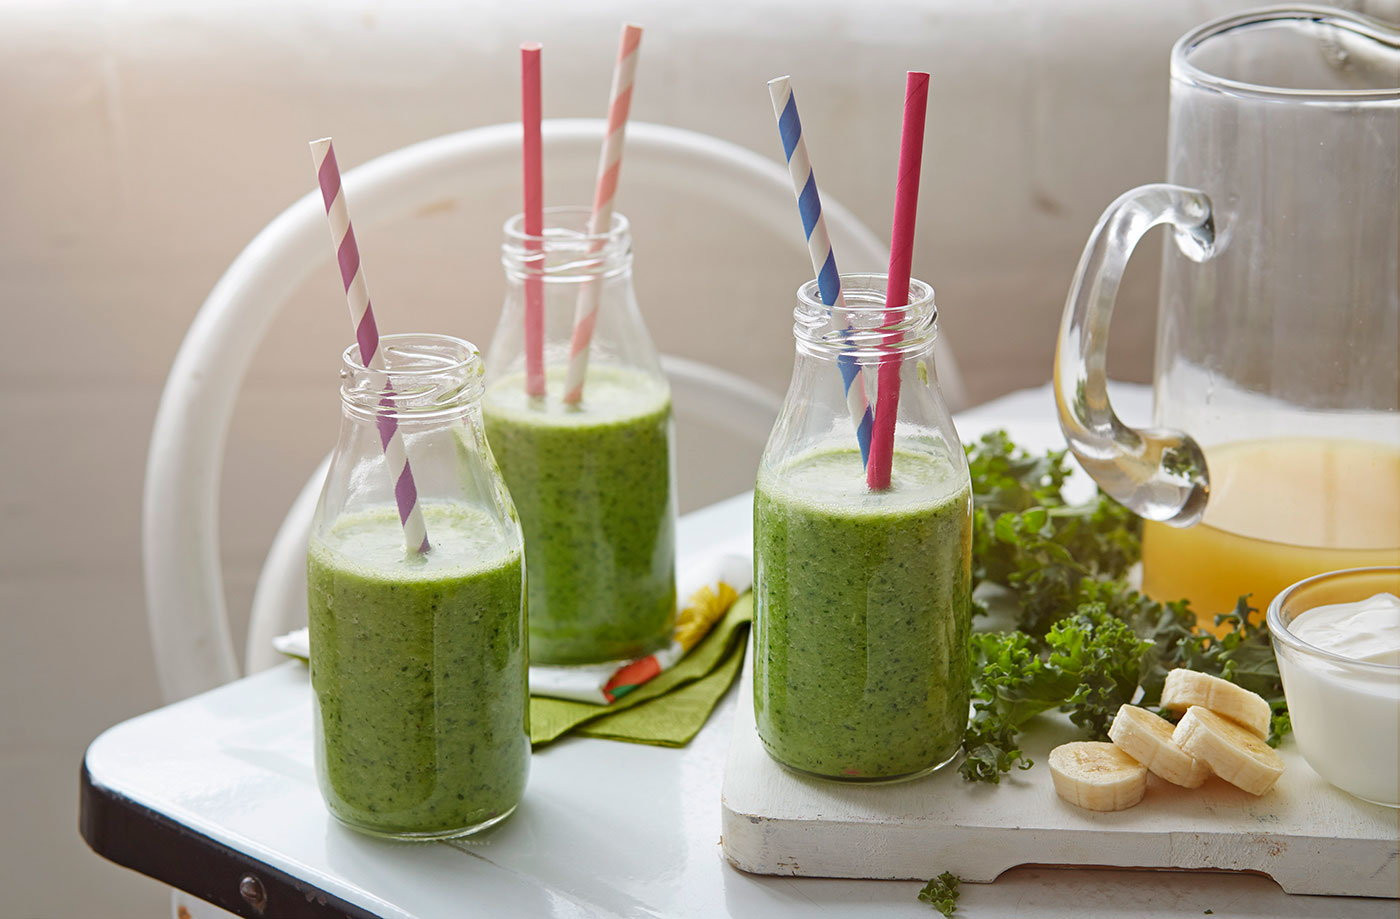 Green Breakfast Smoothie Recipes
 Tropical Green Breakfast Smoothie